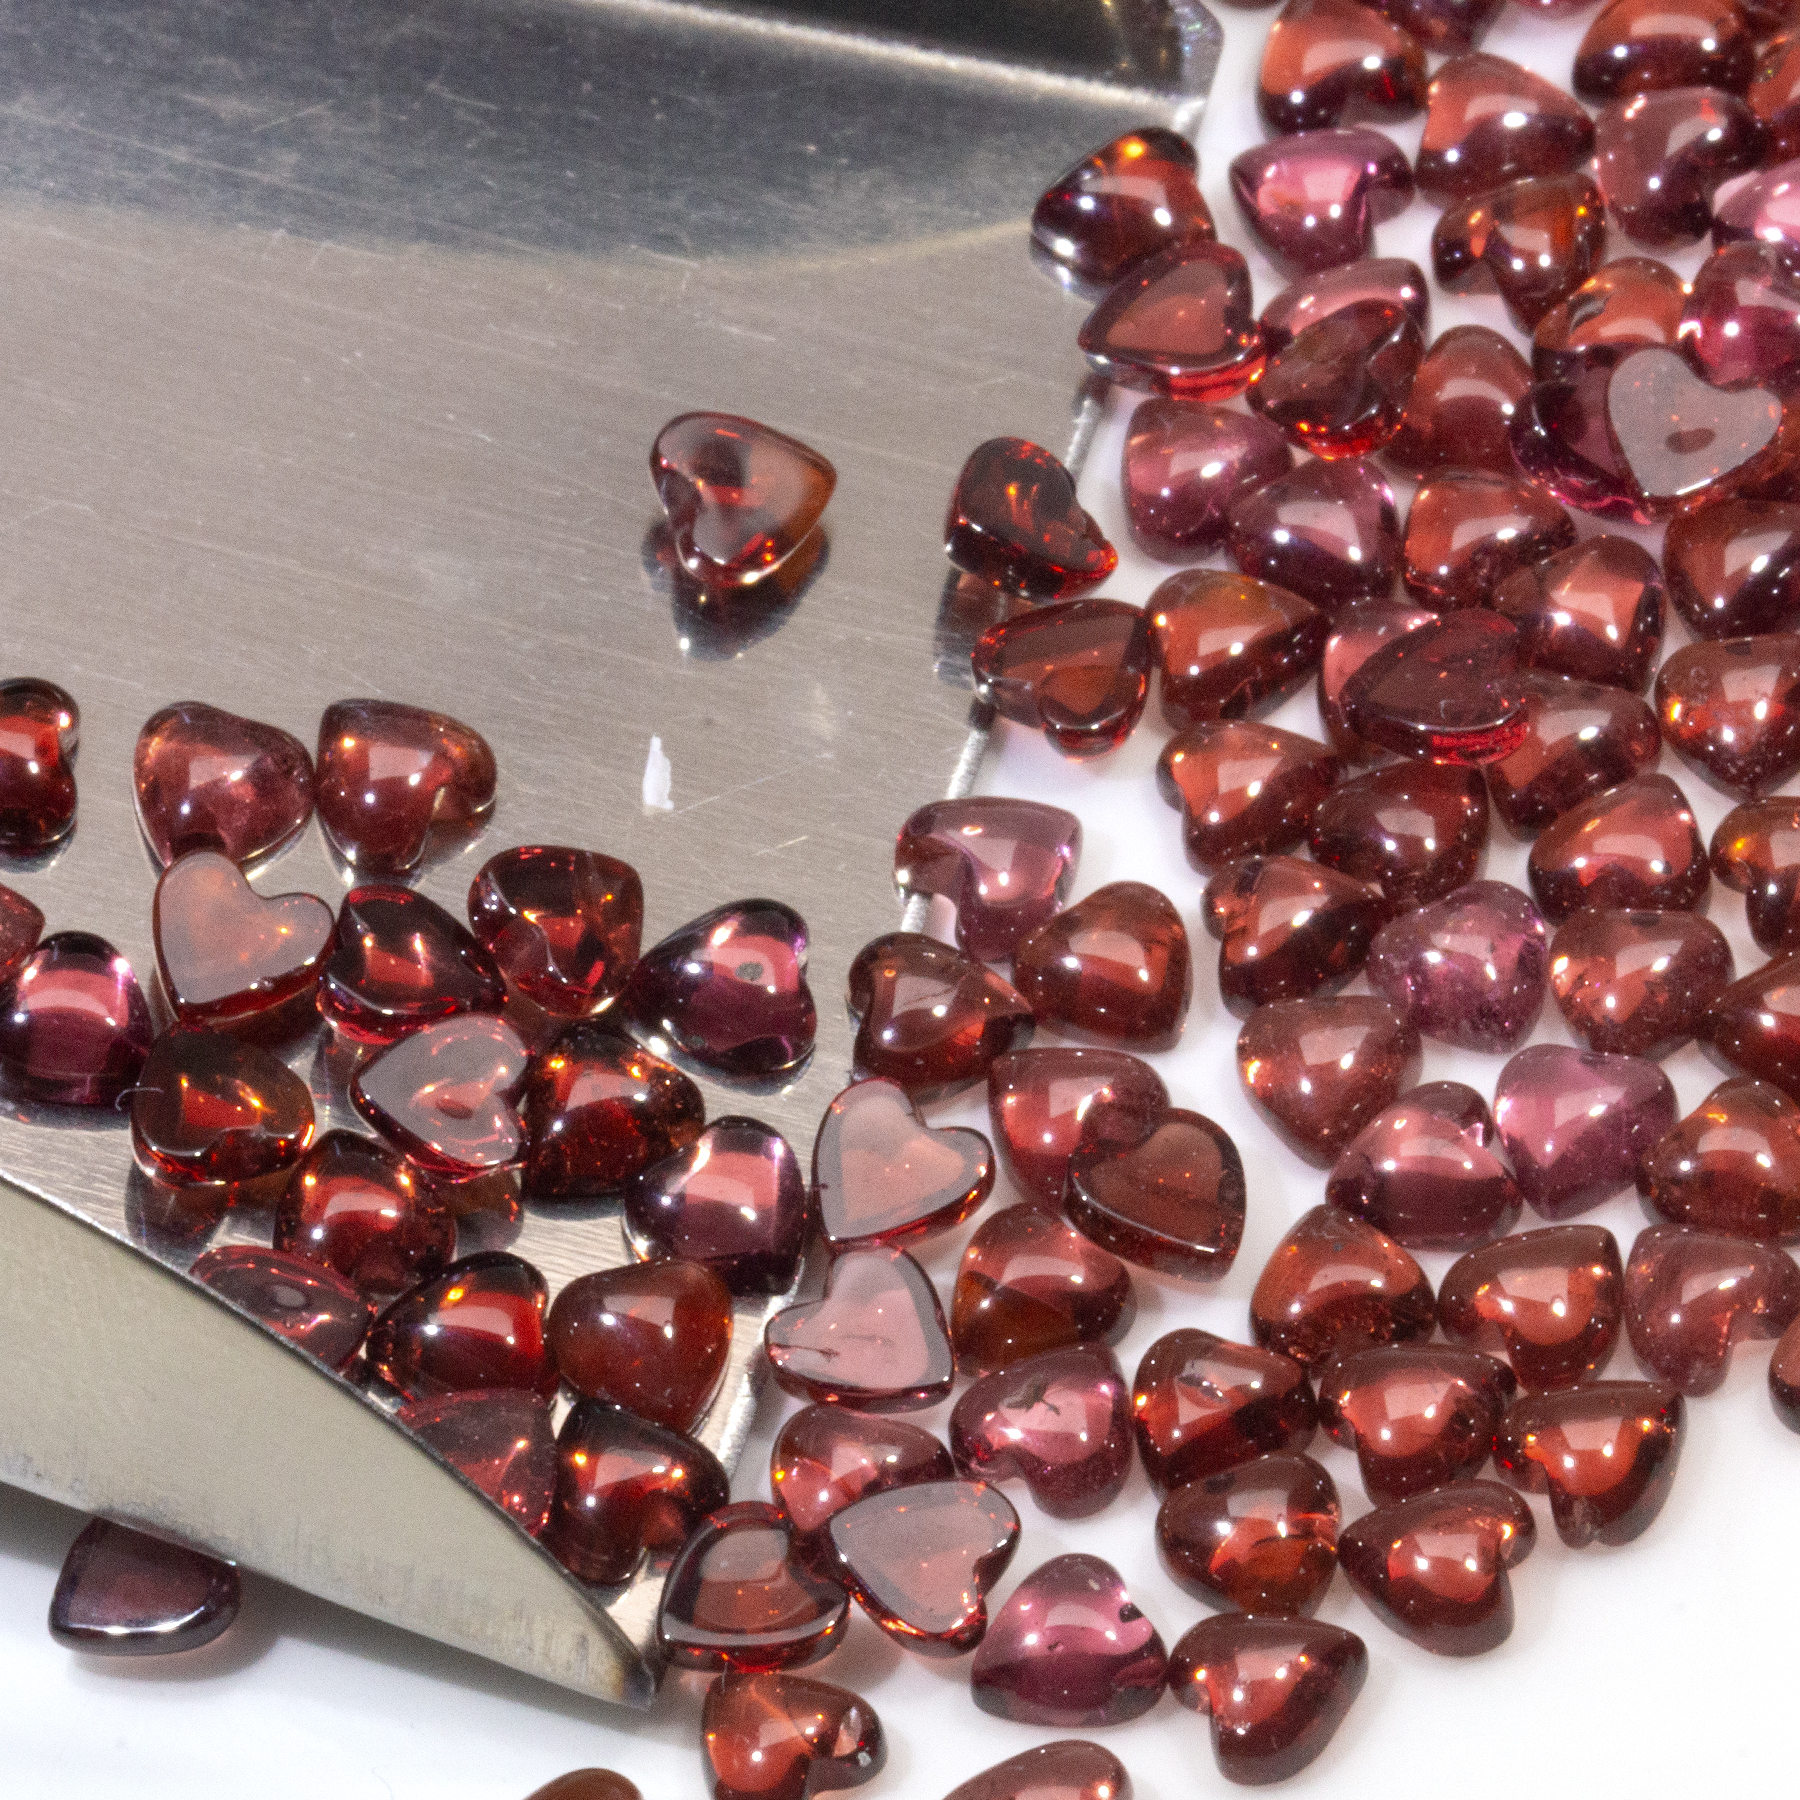 Natural Red Garnet Crystal Clean Heart Cut 4x4mm Featured Image